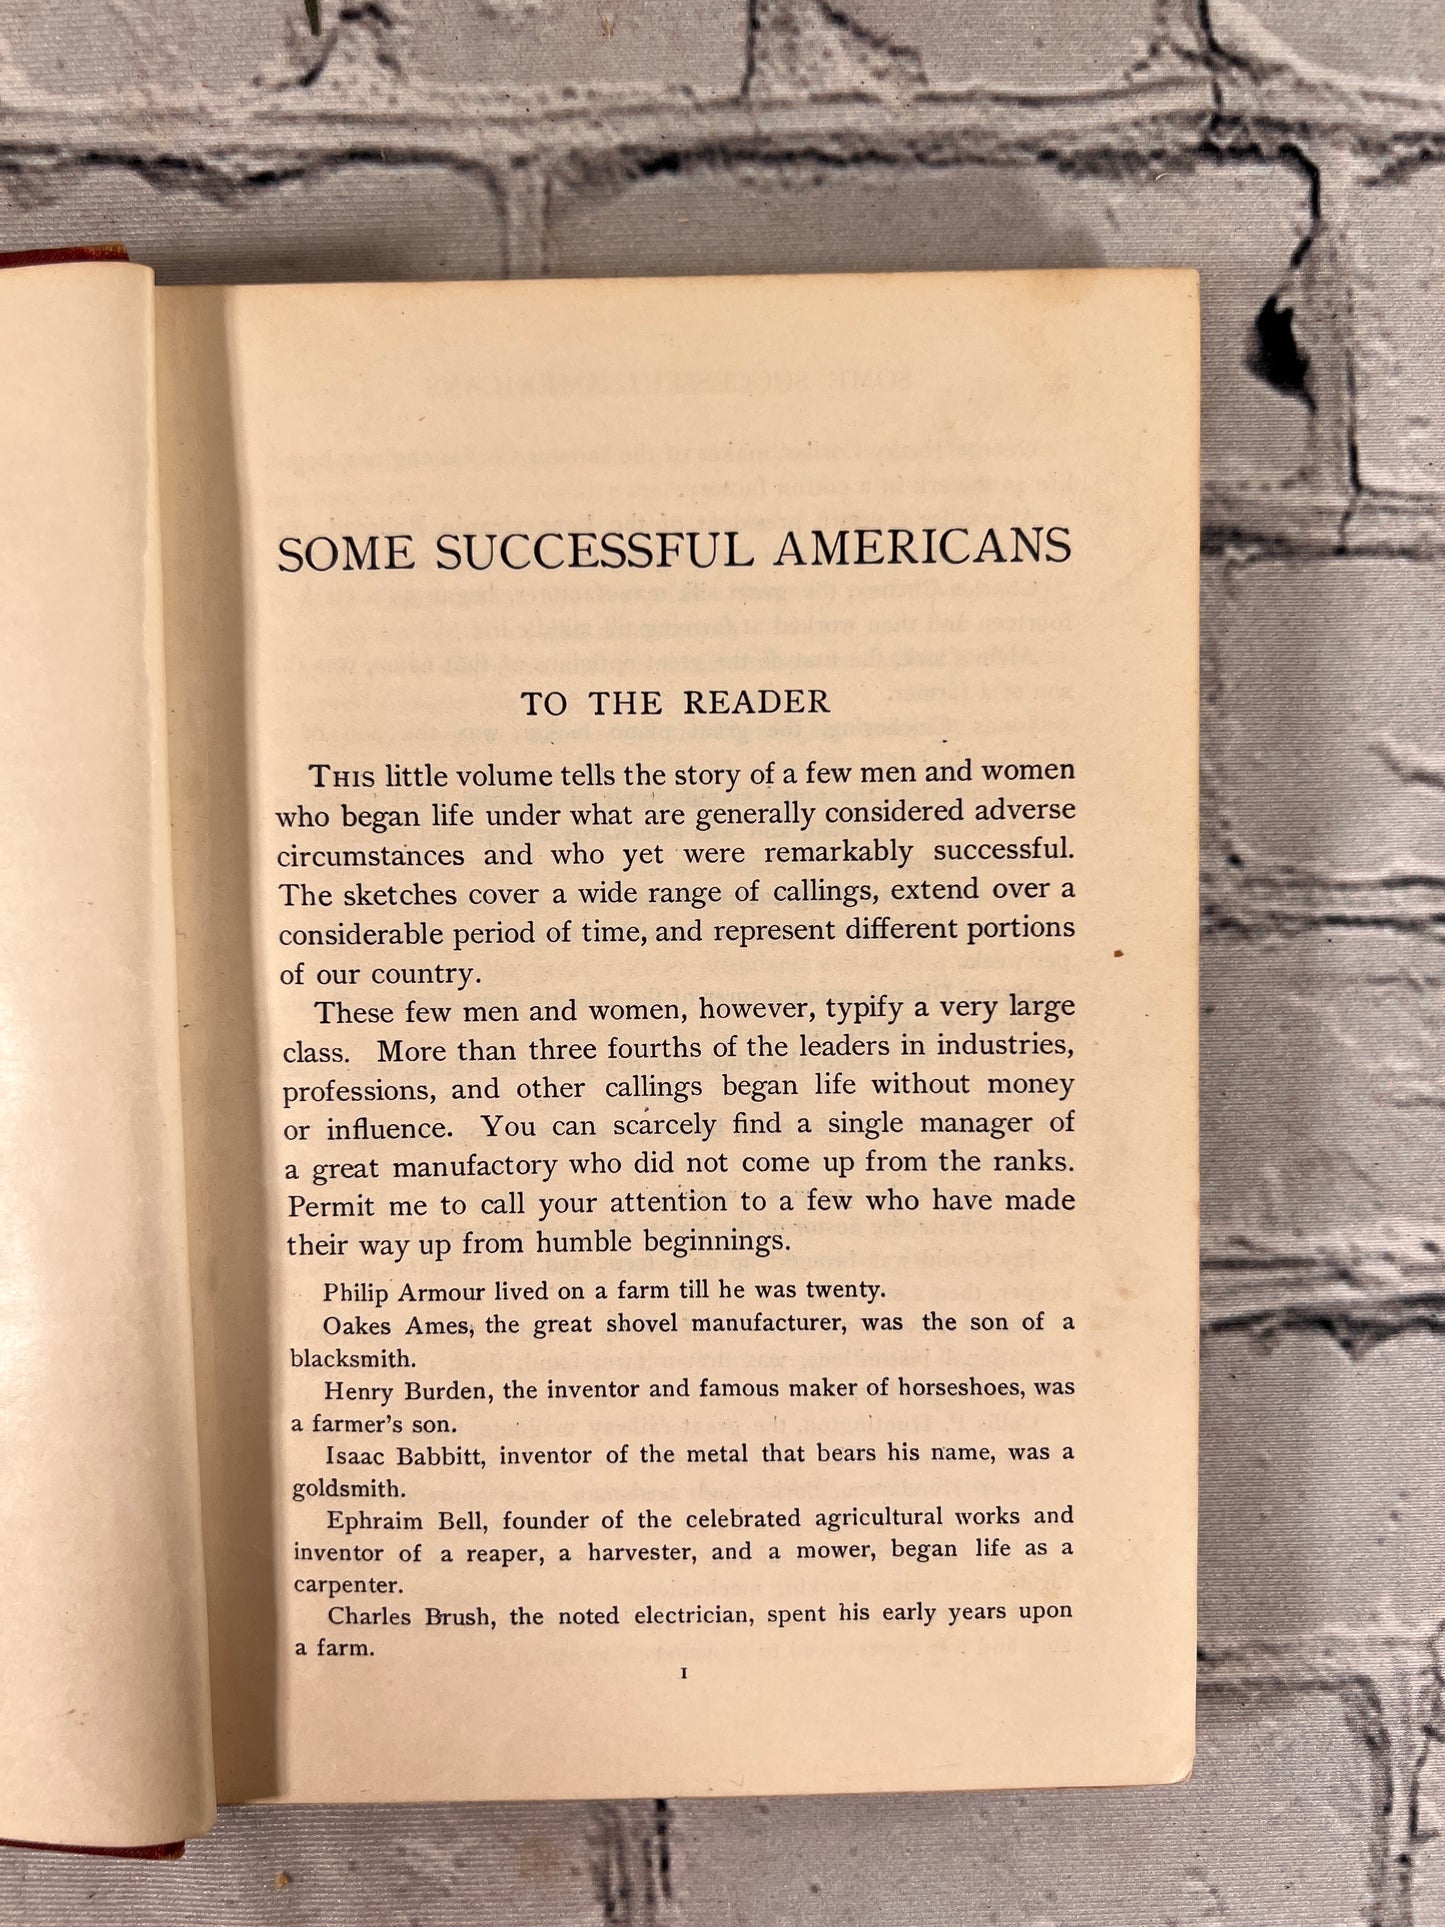 Paths to Knowledge: Some Successful Americans by Sherman Williams [1st Ed · 1904]